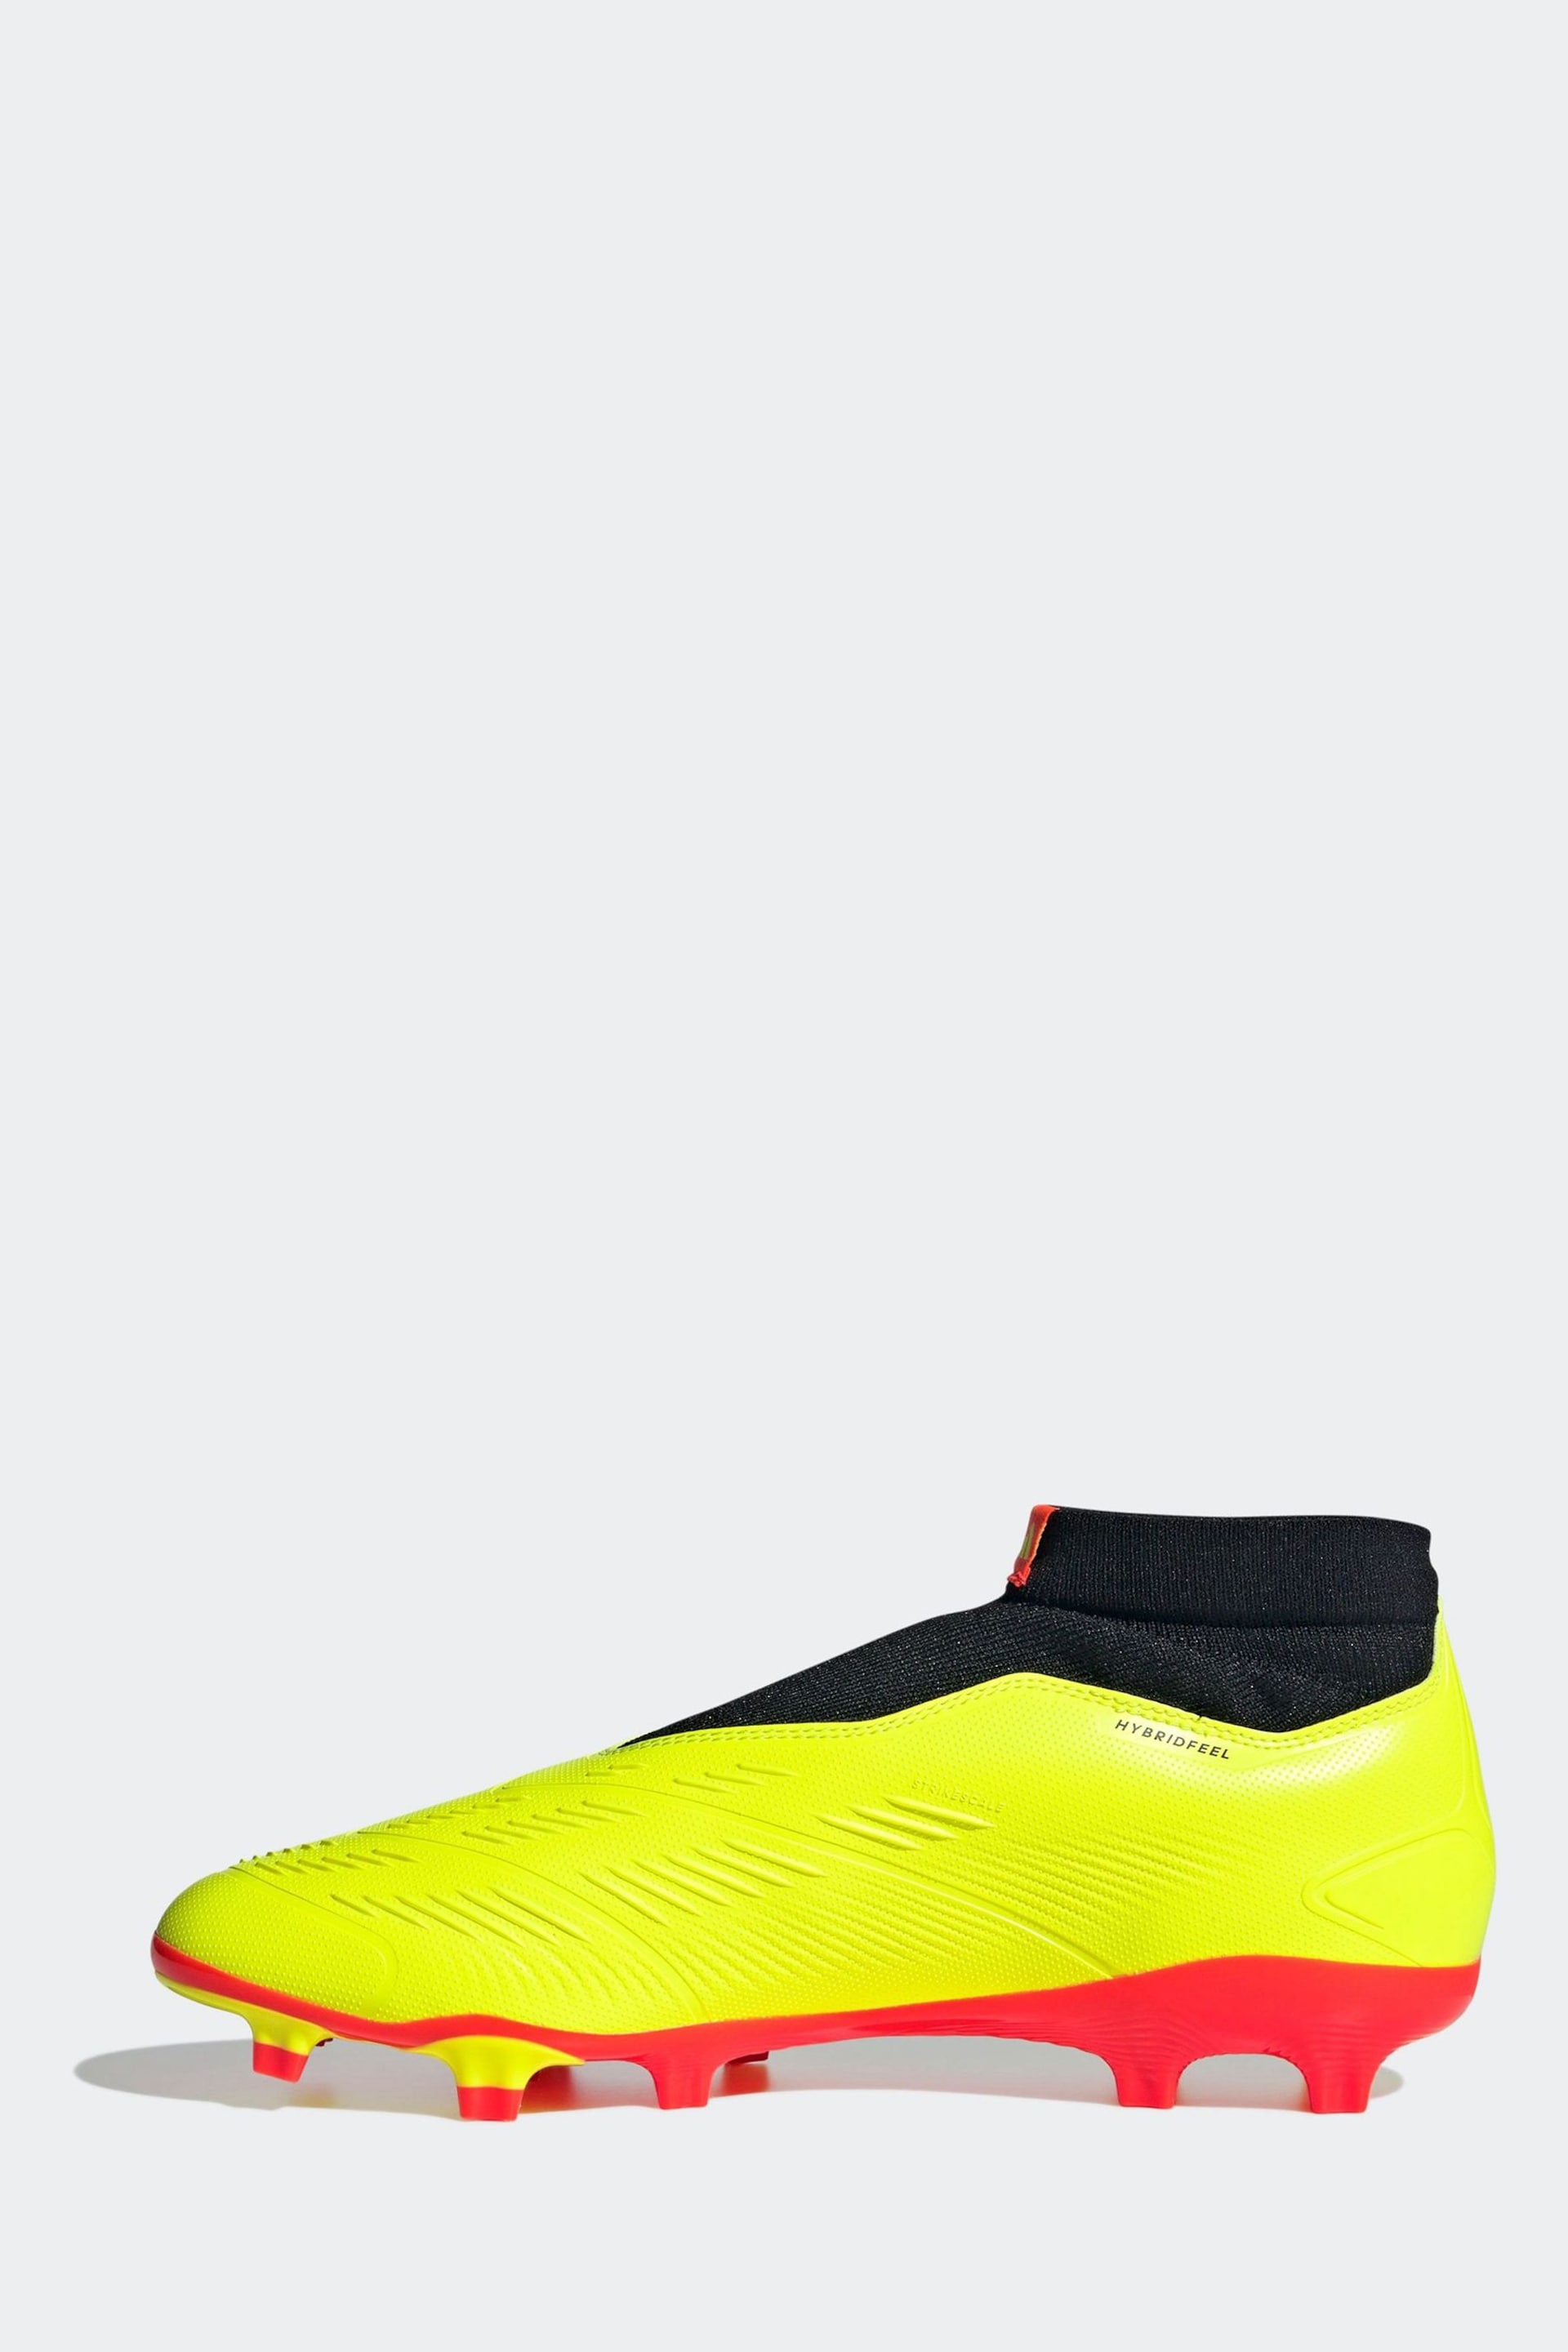 adidas Yellow Football Predator 24 League Laceless Firm Ground Adult Boots - Image 6 of 12